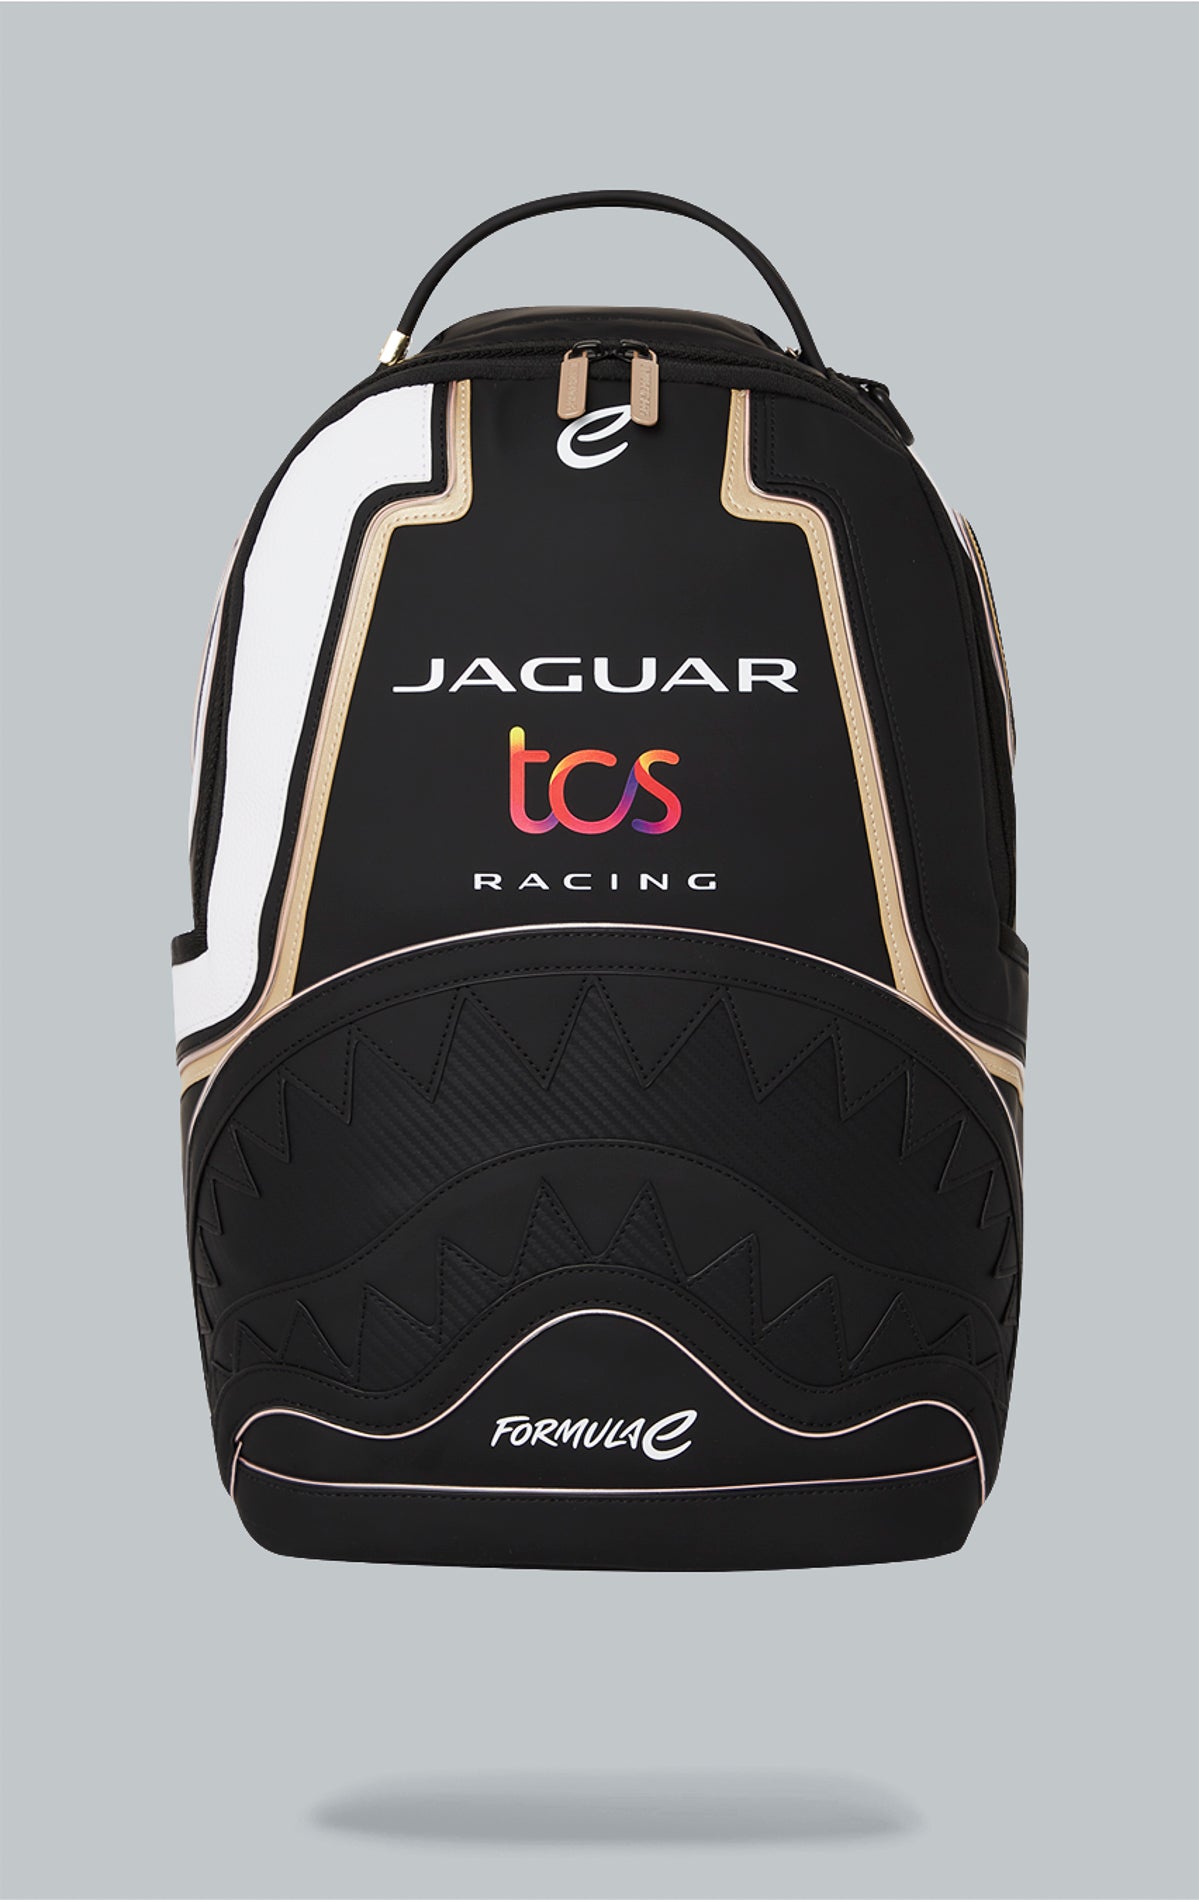 Sprayground x Formula E Jaguar backpack with built-in LED lights. Black water-resistant PVC backpack with Formula E Jaguar design. Includes laptop compartment, organizer pocket, and USB cable for charging. Note: Lithium battery inside, check with airline before travel.